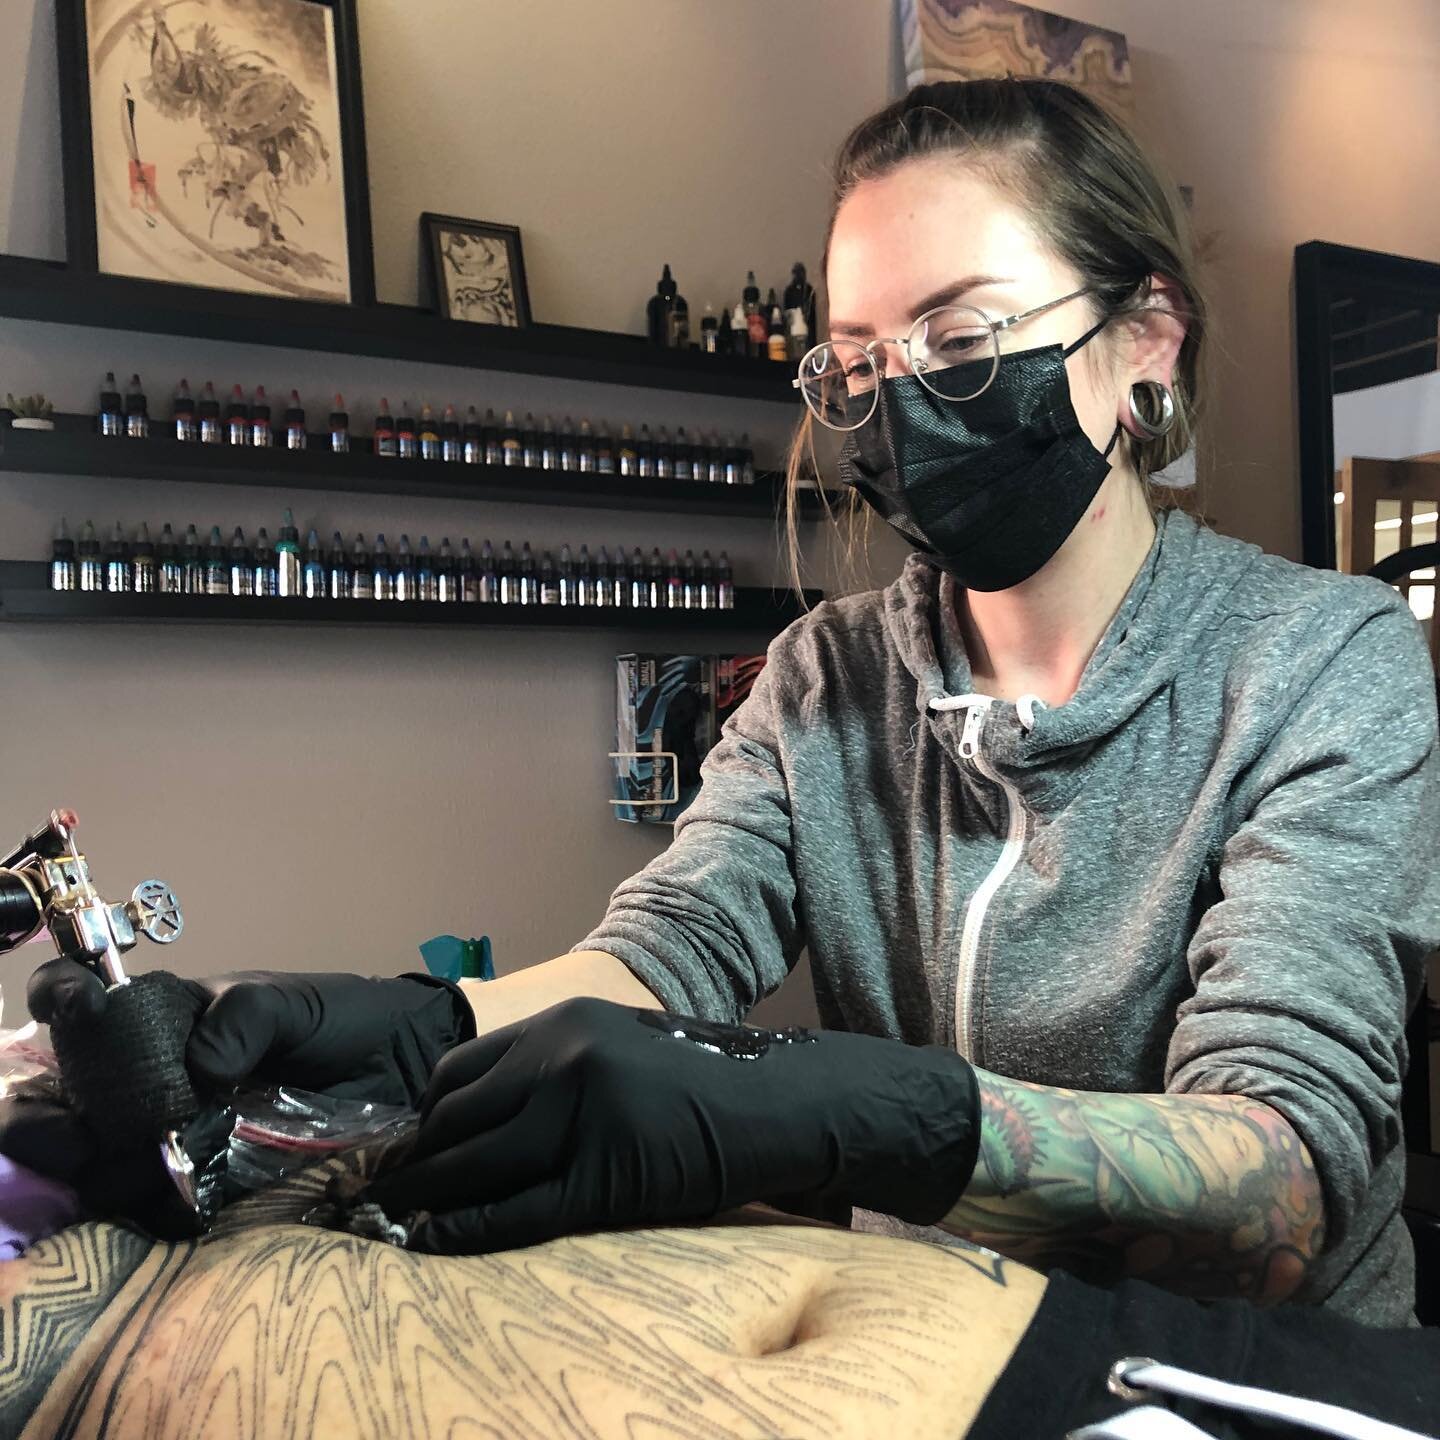 It&rsquo;s been awhile since someone has photographed me while working besides a customer 😂 Action shot, thanks @privatestocksean #tattooartist #tattoostation